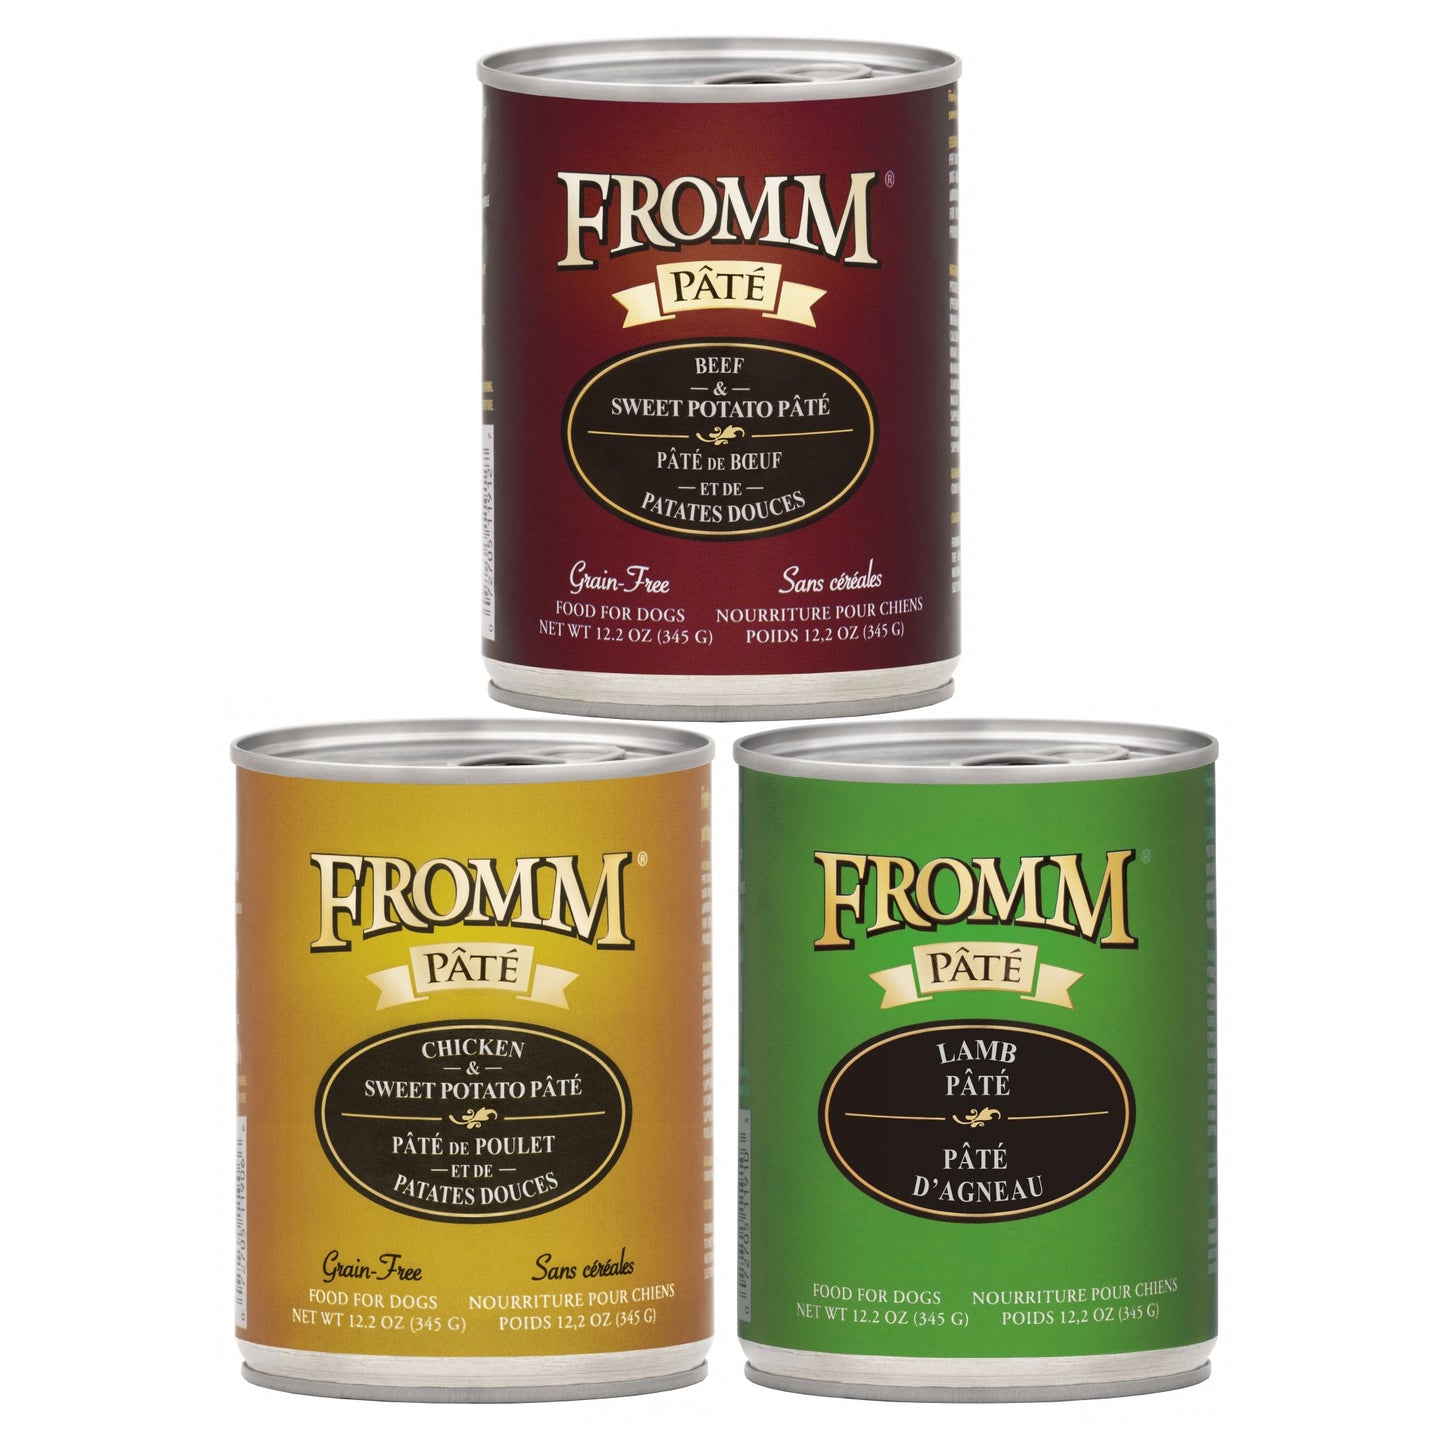 Fromm Pate Canned Dog Foods Beef & Barley Image